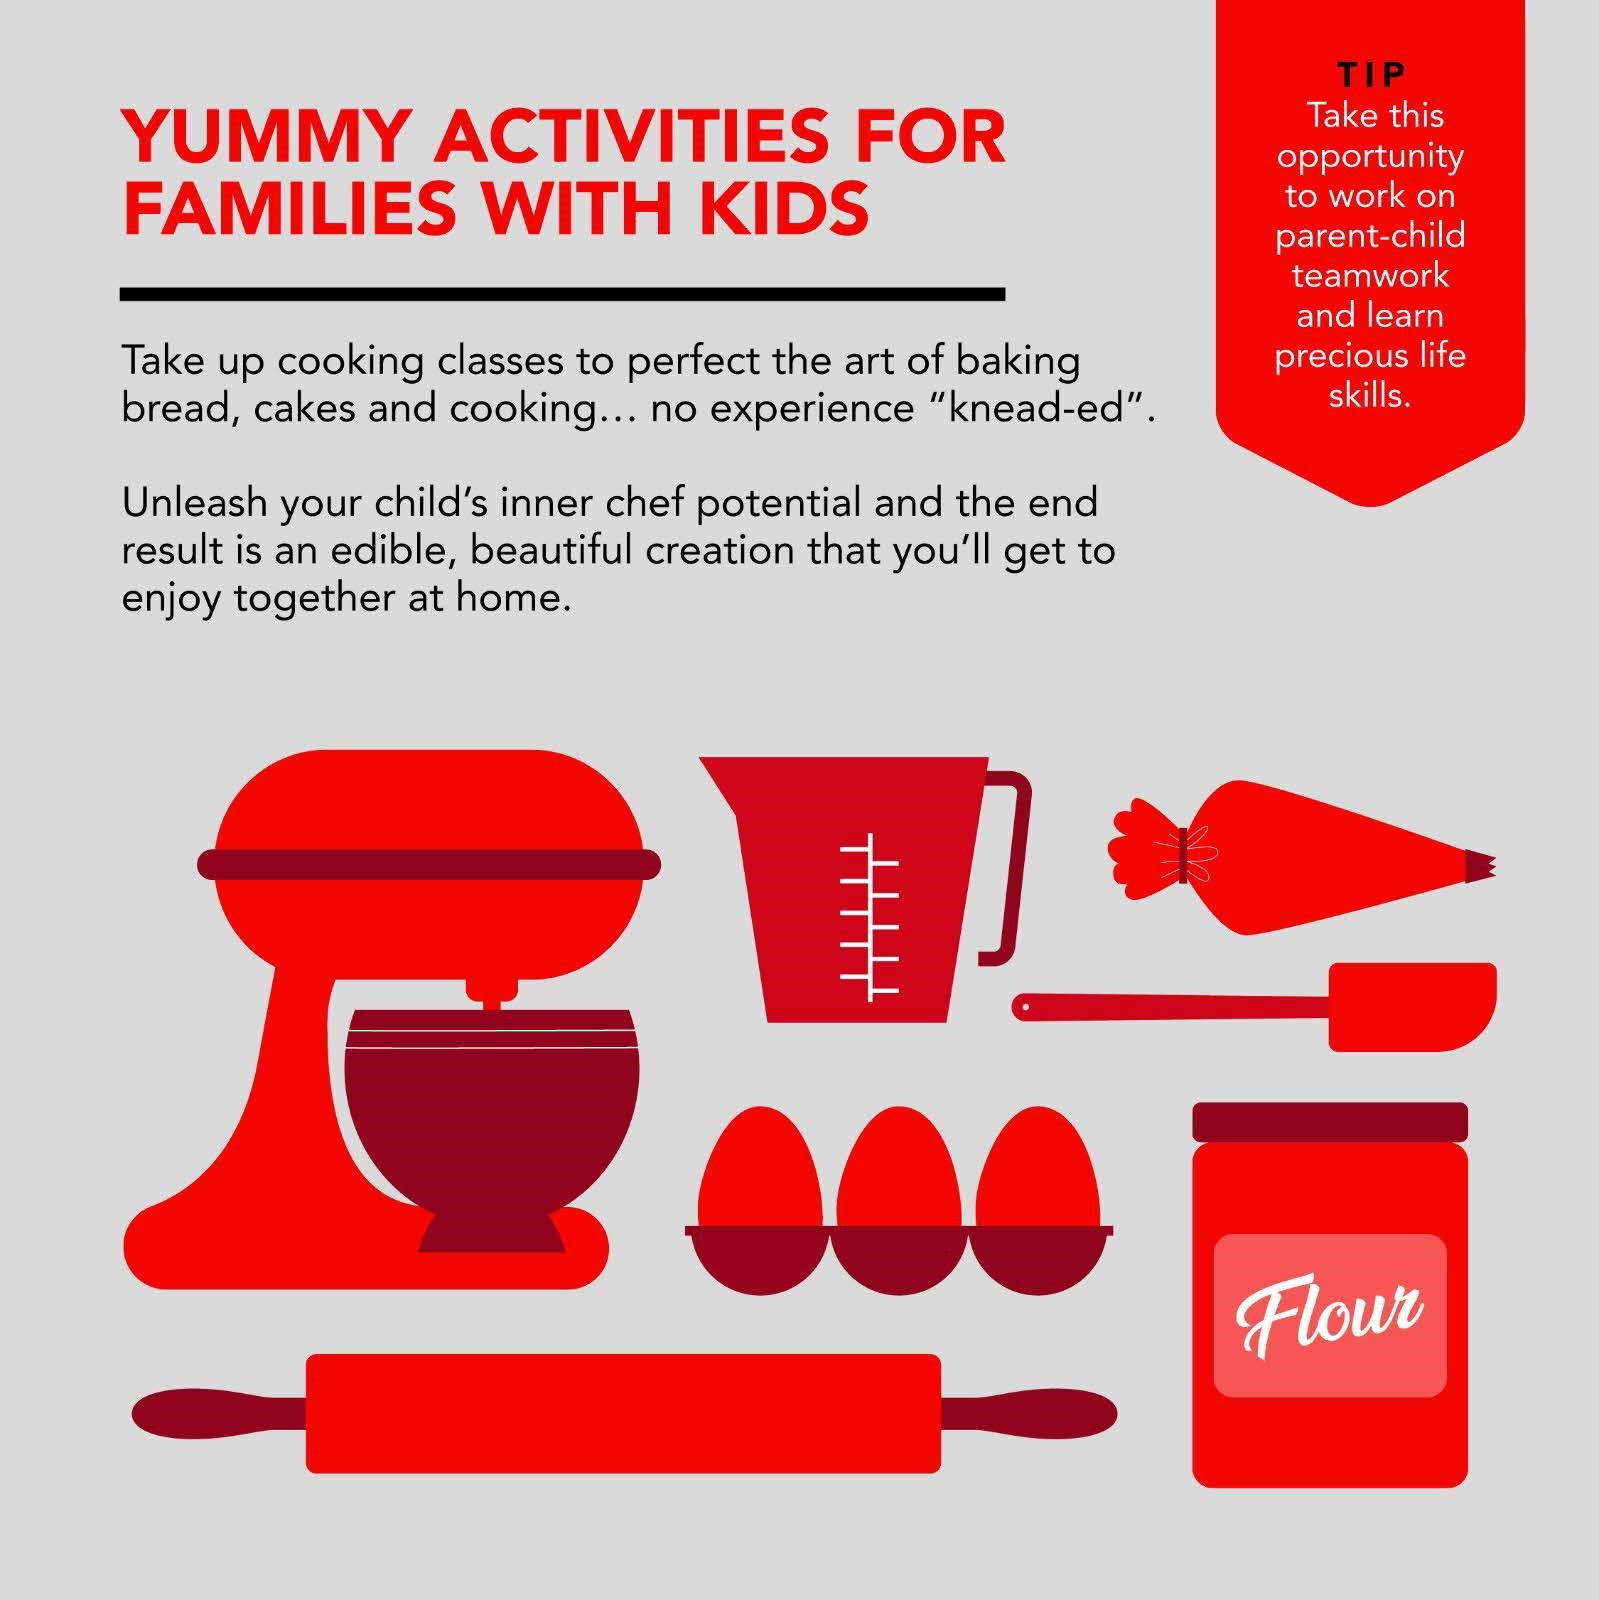 Yummy activities for families with kids